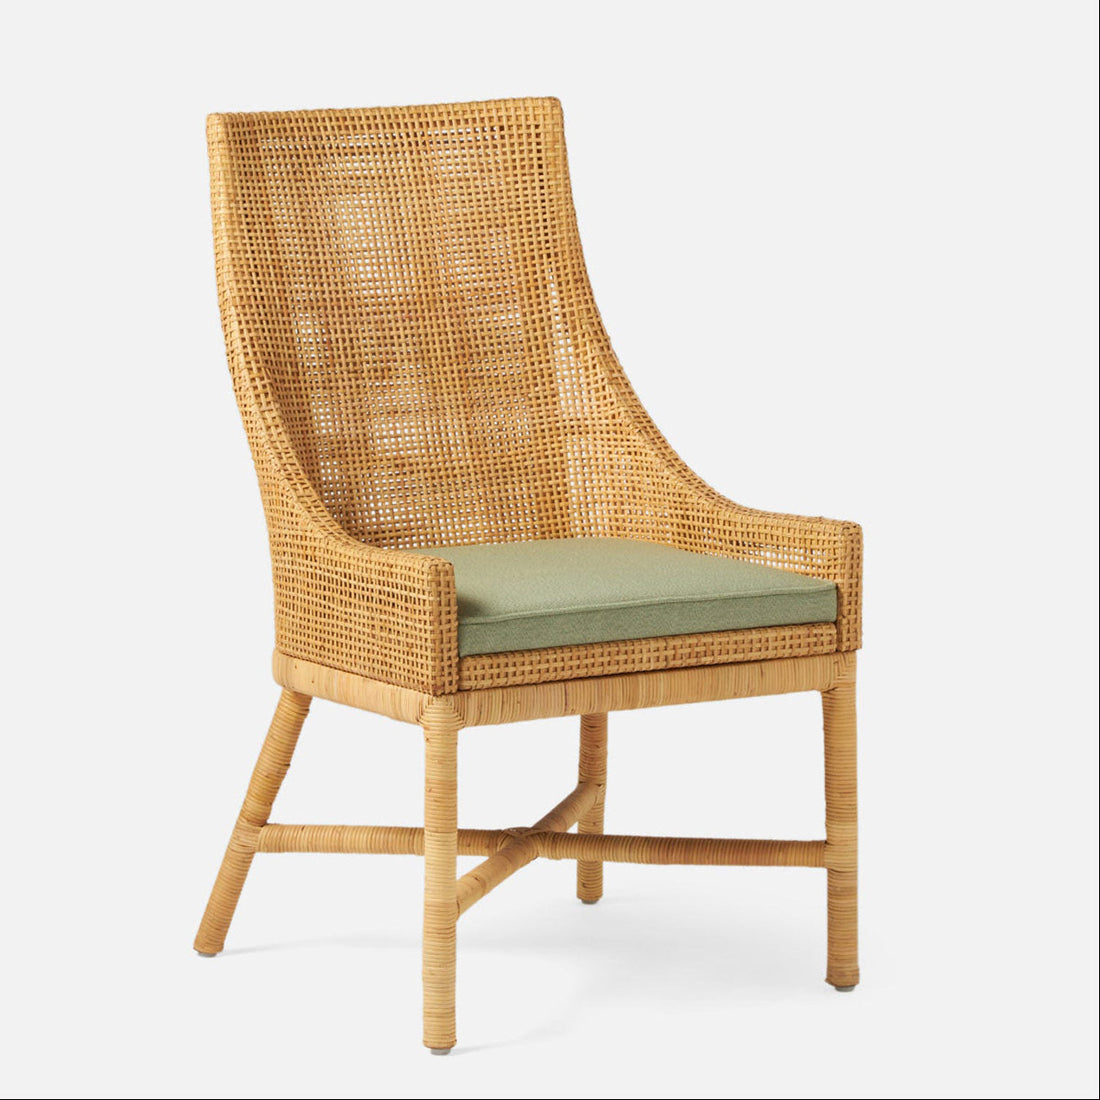 Made Goods Isla Woven Rattan Dining Chair in Humboldt Cotton Jute